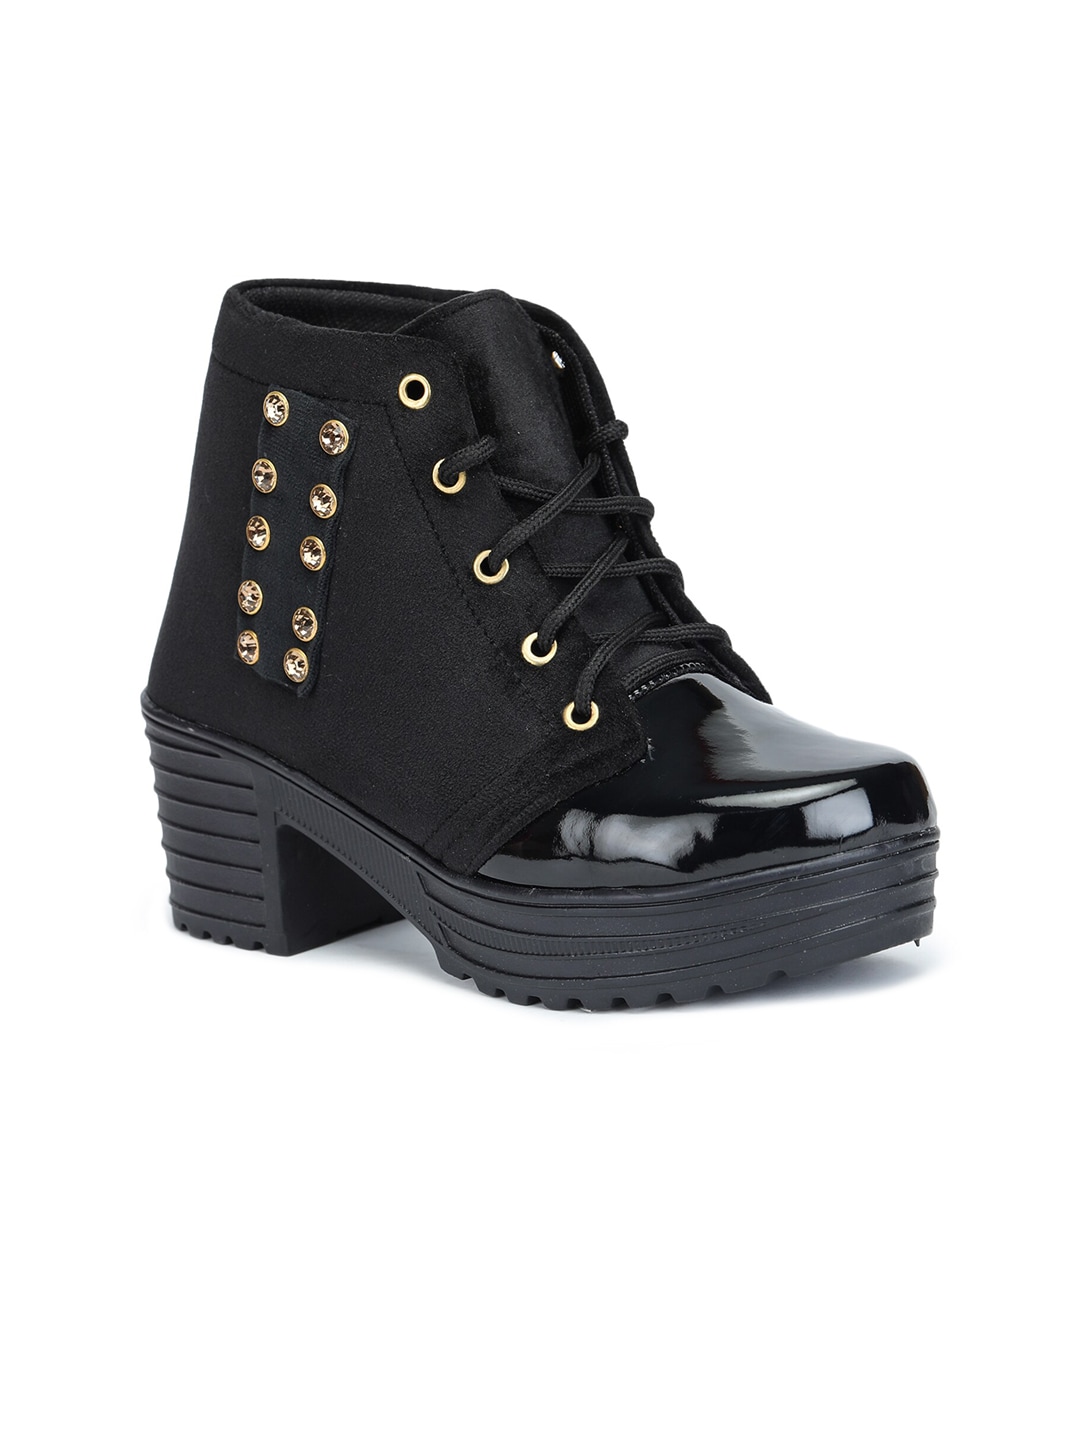 LONDON STEPS Black Suede Block Heeled Boots Price in India